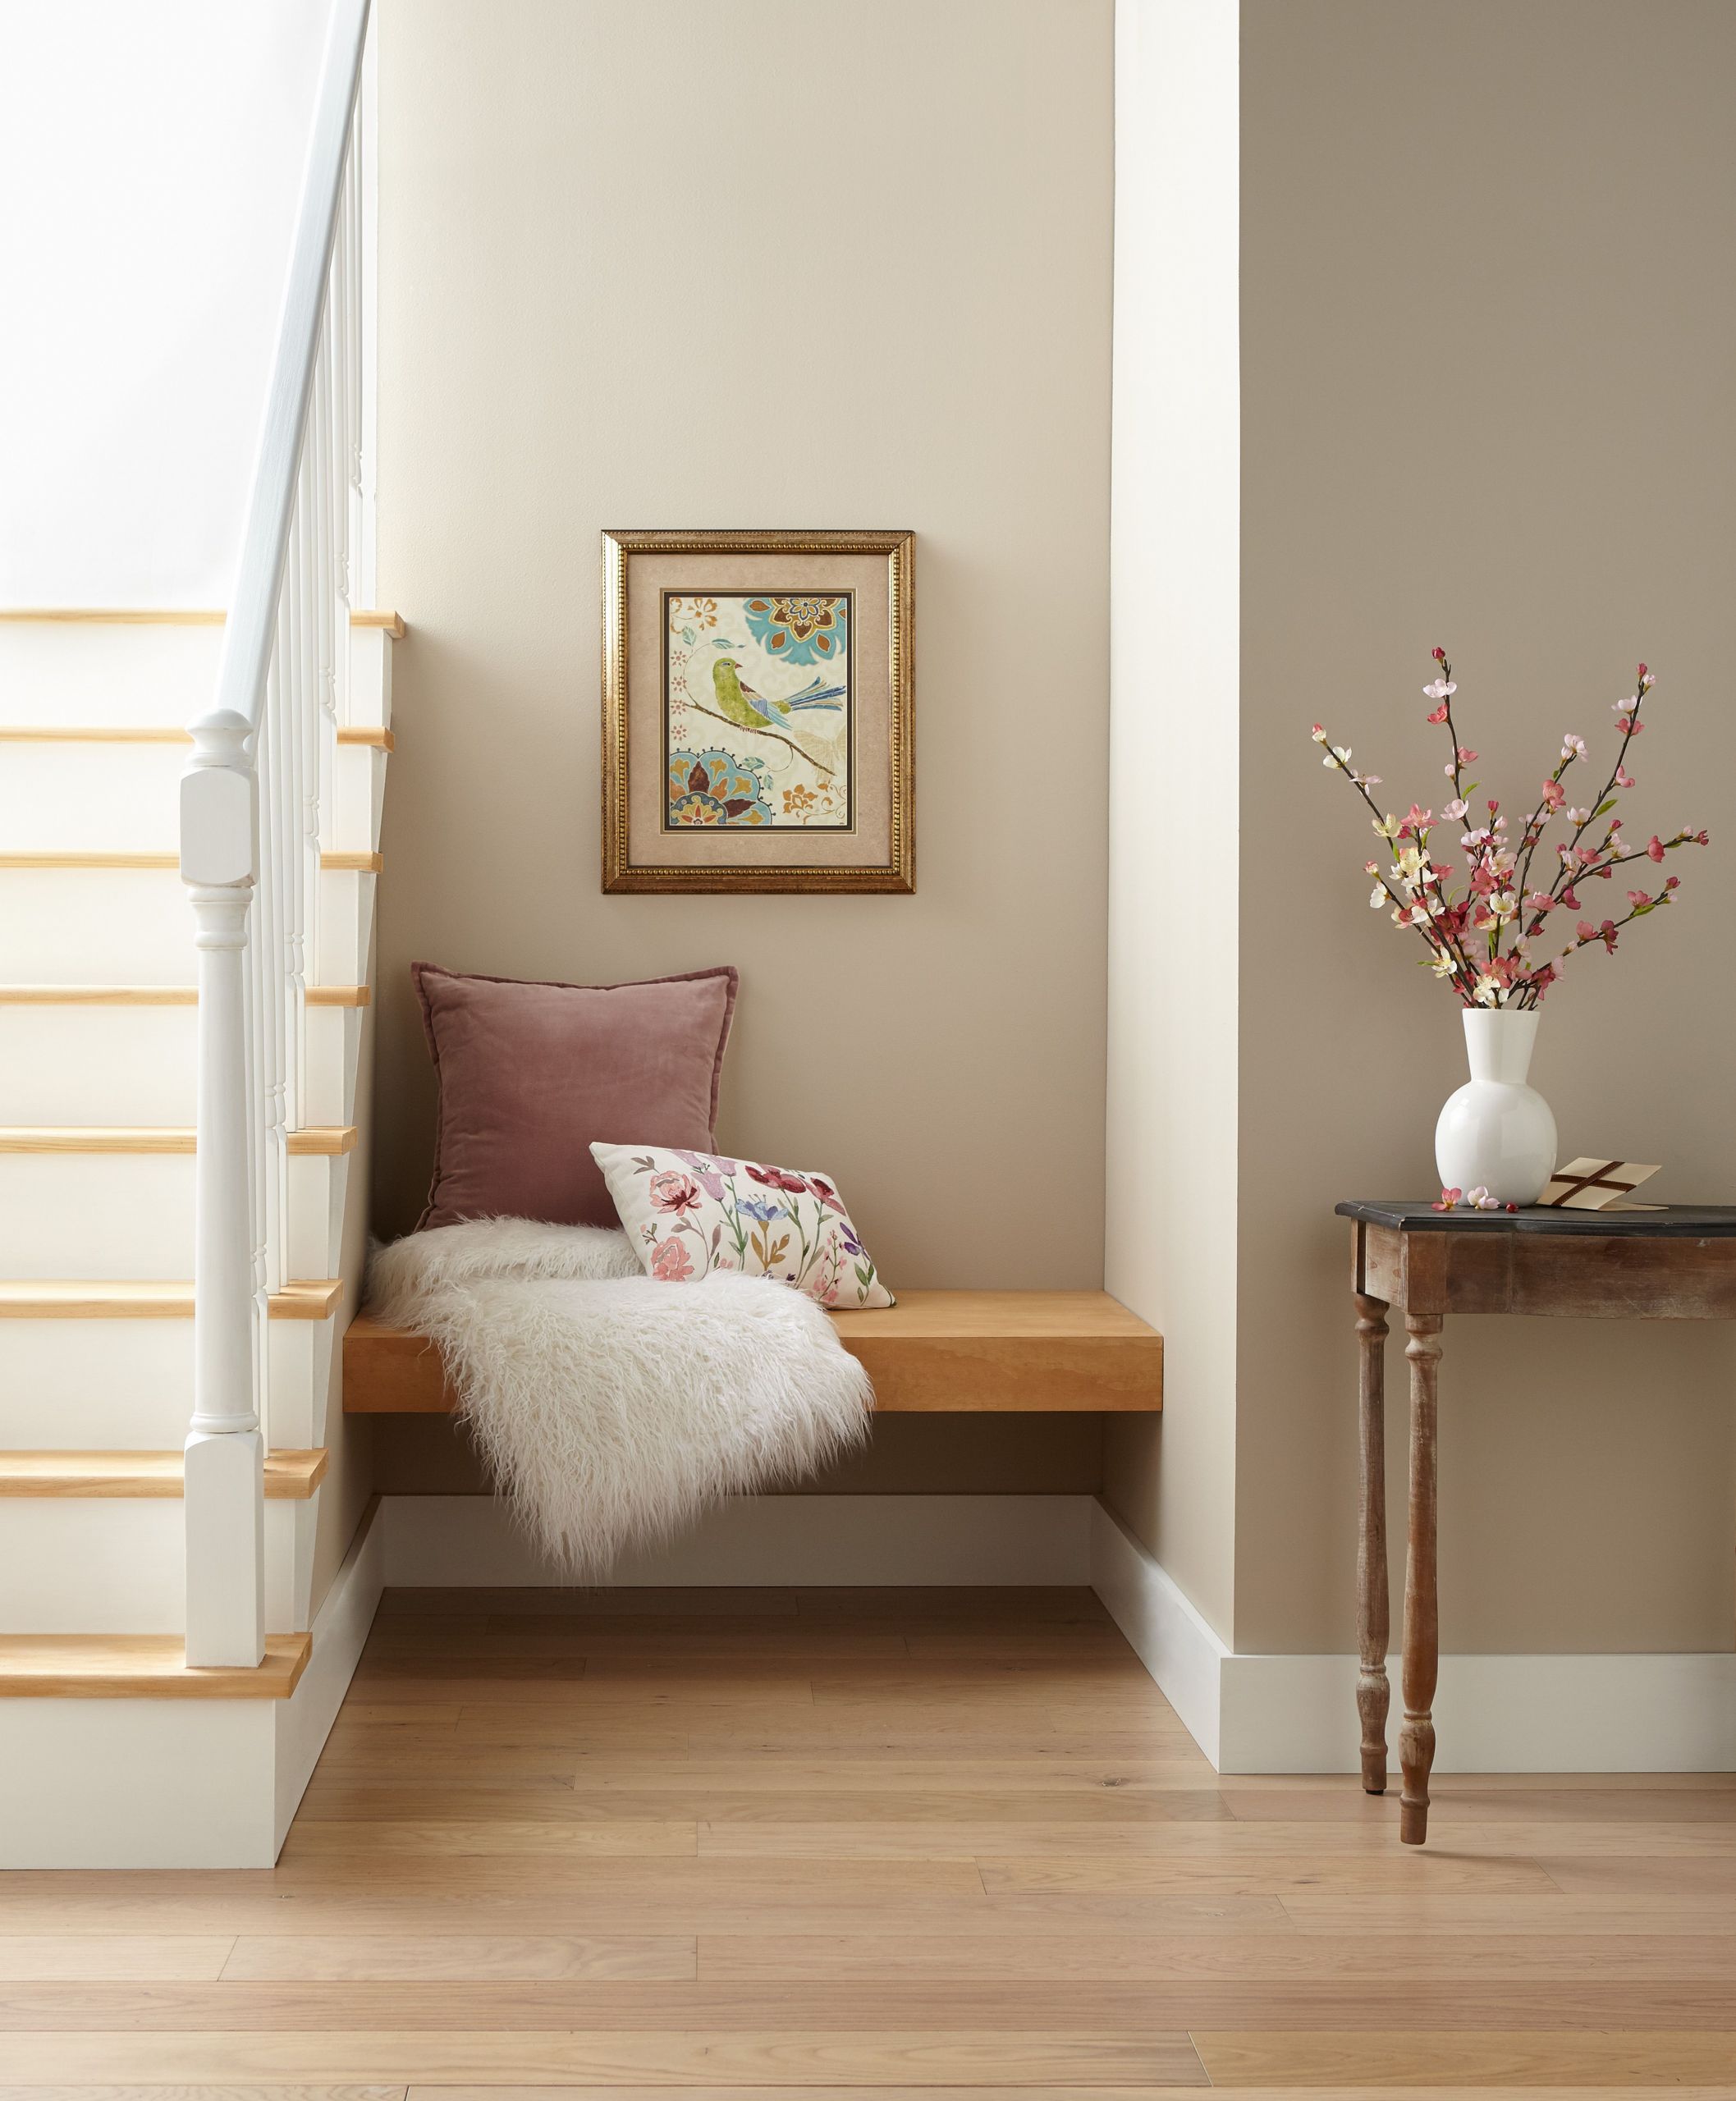 Living Room Color Schemes 2020
 These Are the Paint Color Trends for 2020 According to Behr